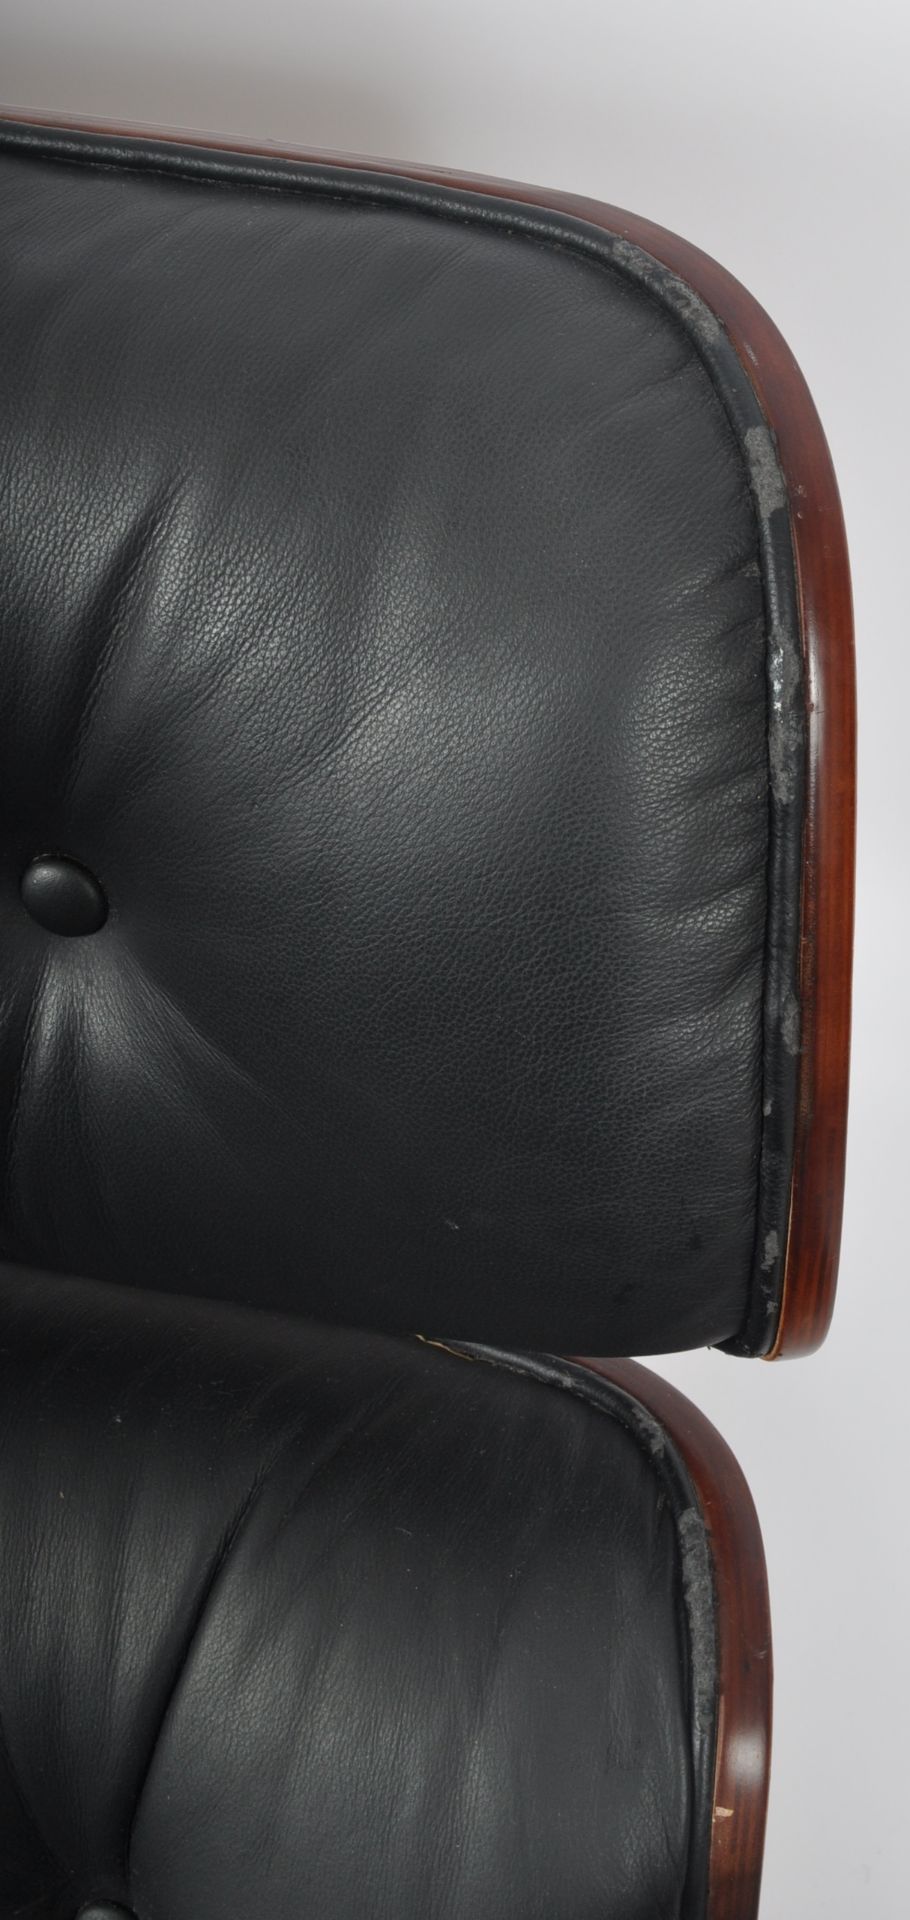 AFTER CHARLES & RAY EAMES - HERMAN MILLER STYLE ARMCHAIR - Image 7 of 9